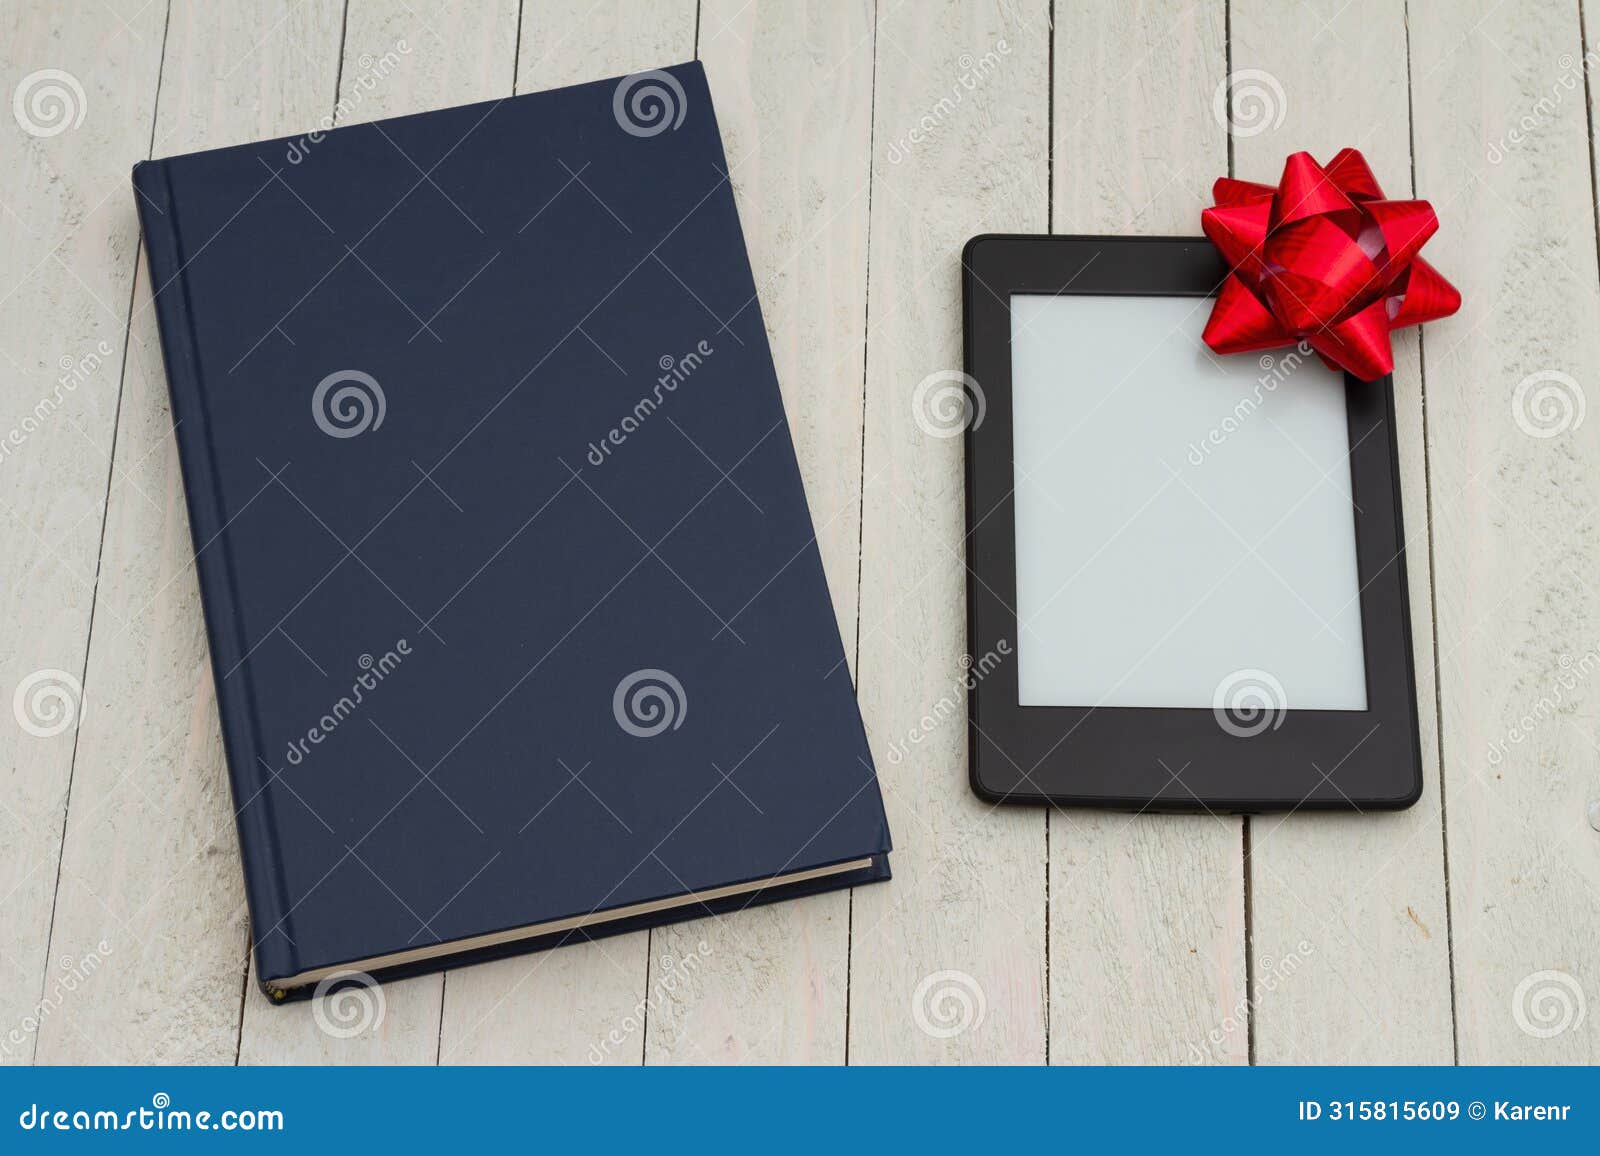 retro old blue book on a desk with an ereader with gift bow